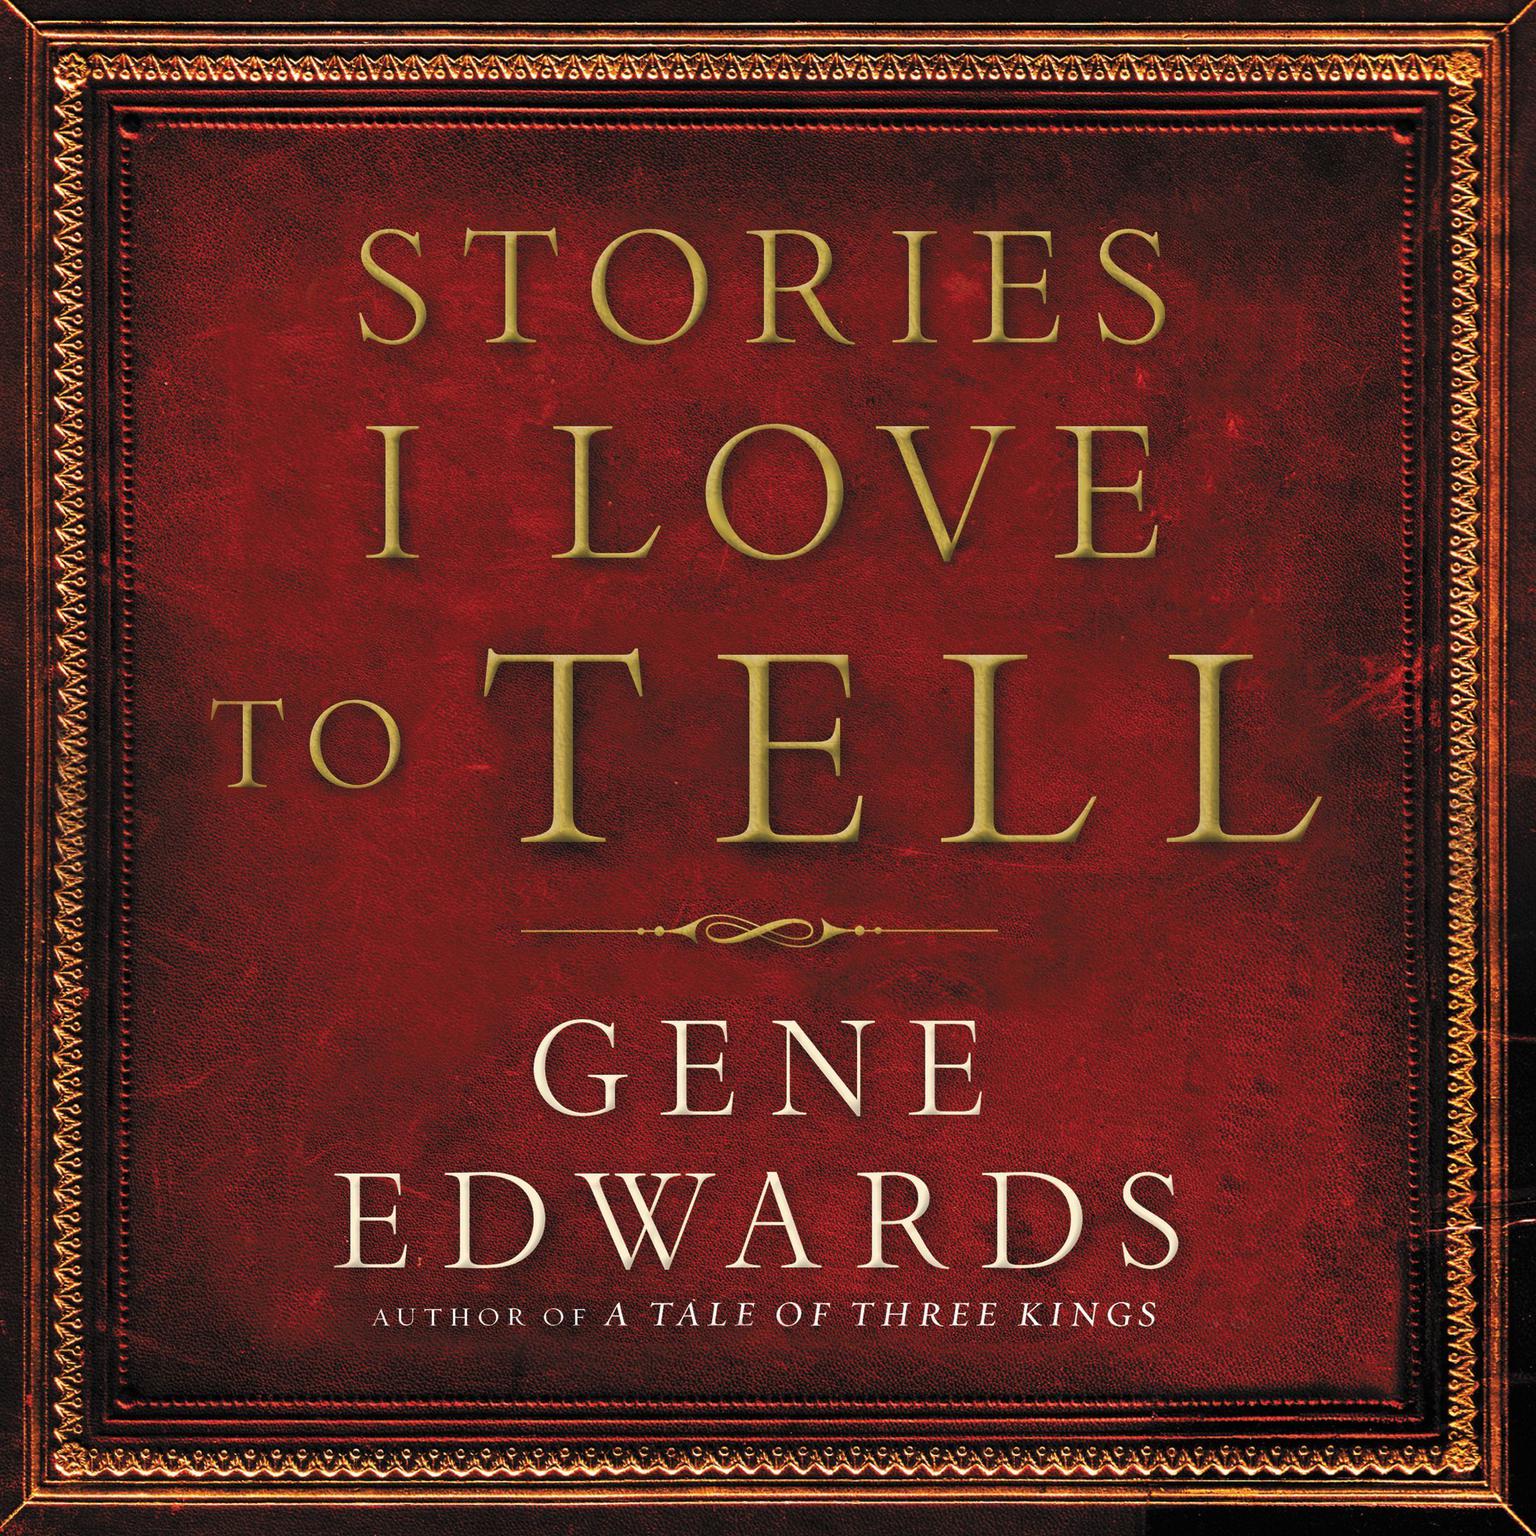 Stories I Love to Tell Audiobook, by Gene Edwards